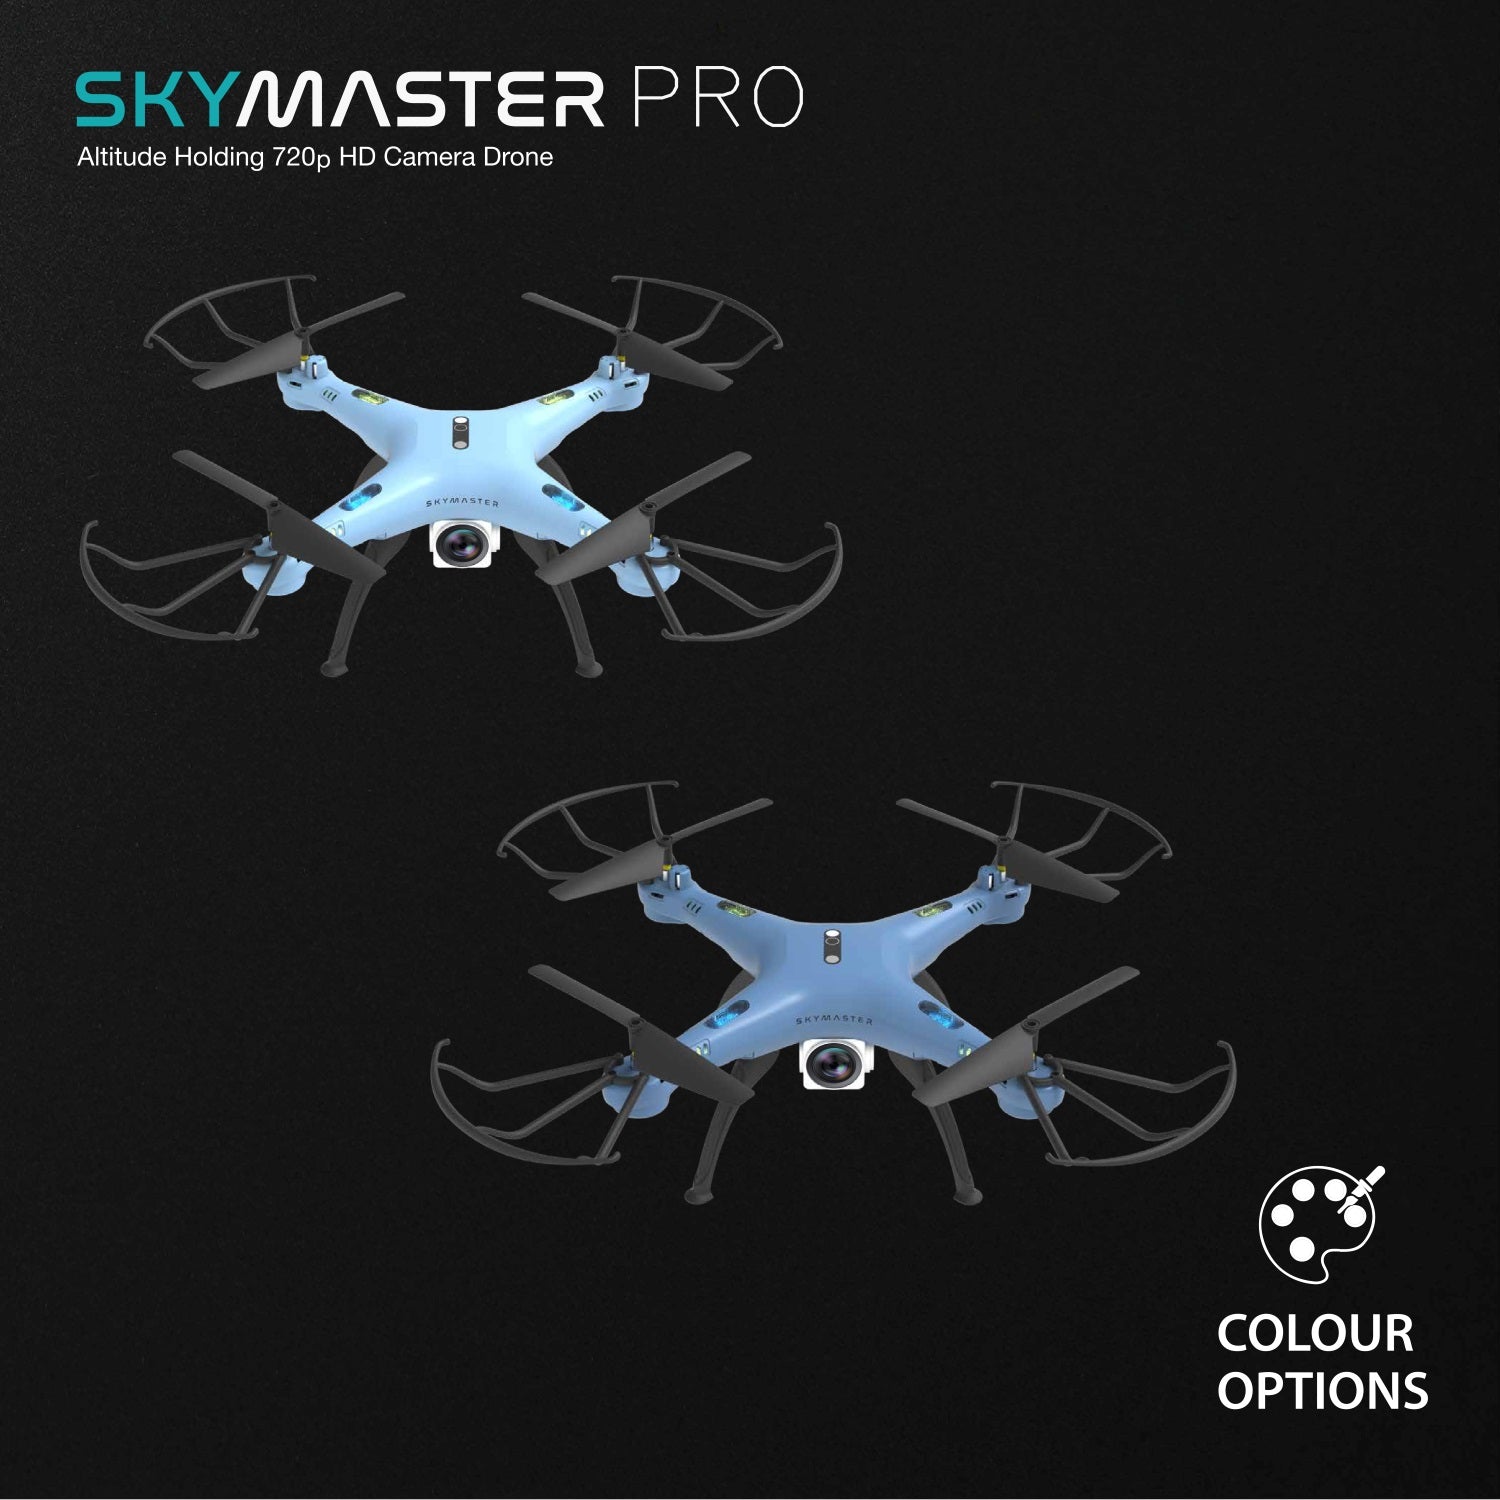 new veer drone. veer next drone is new skymaster pro.